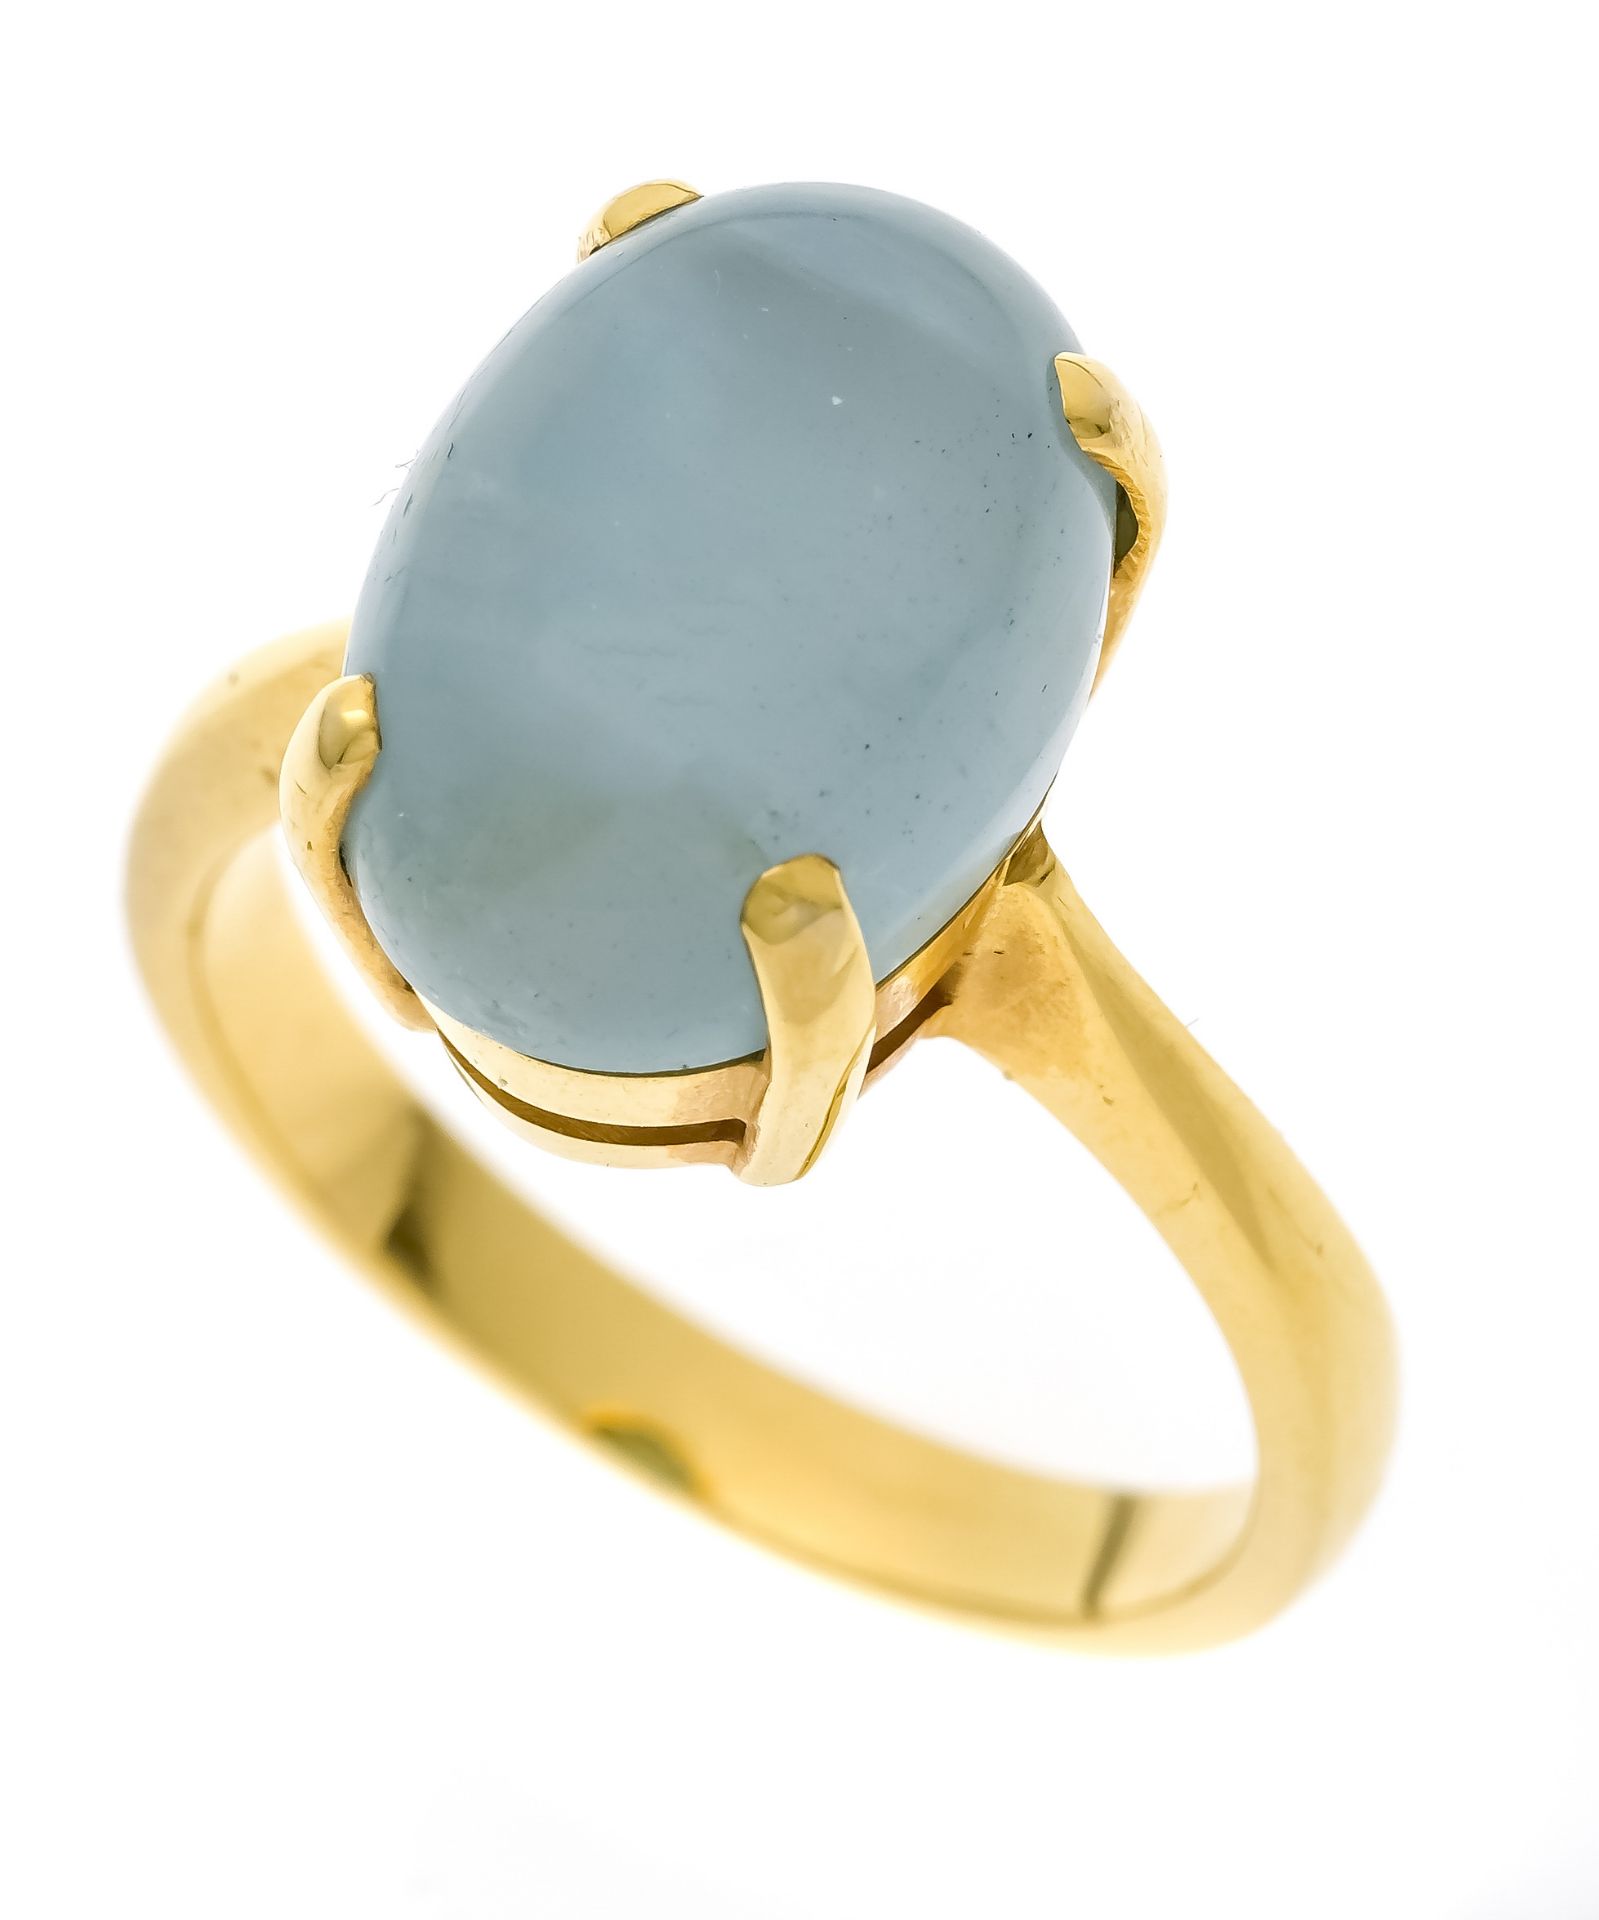 Aquamarine ring GG 750/000 unstamped, tested, with an oval aquamarine cabochon 13.9 x 10.0 mm in a